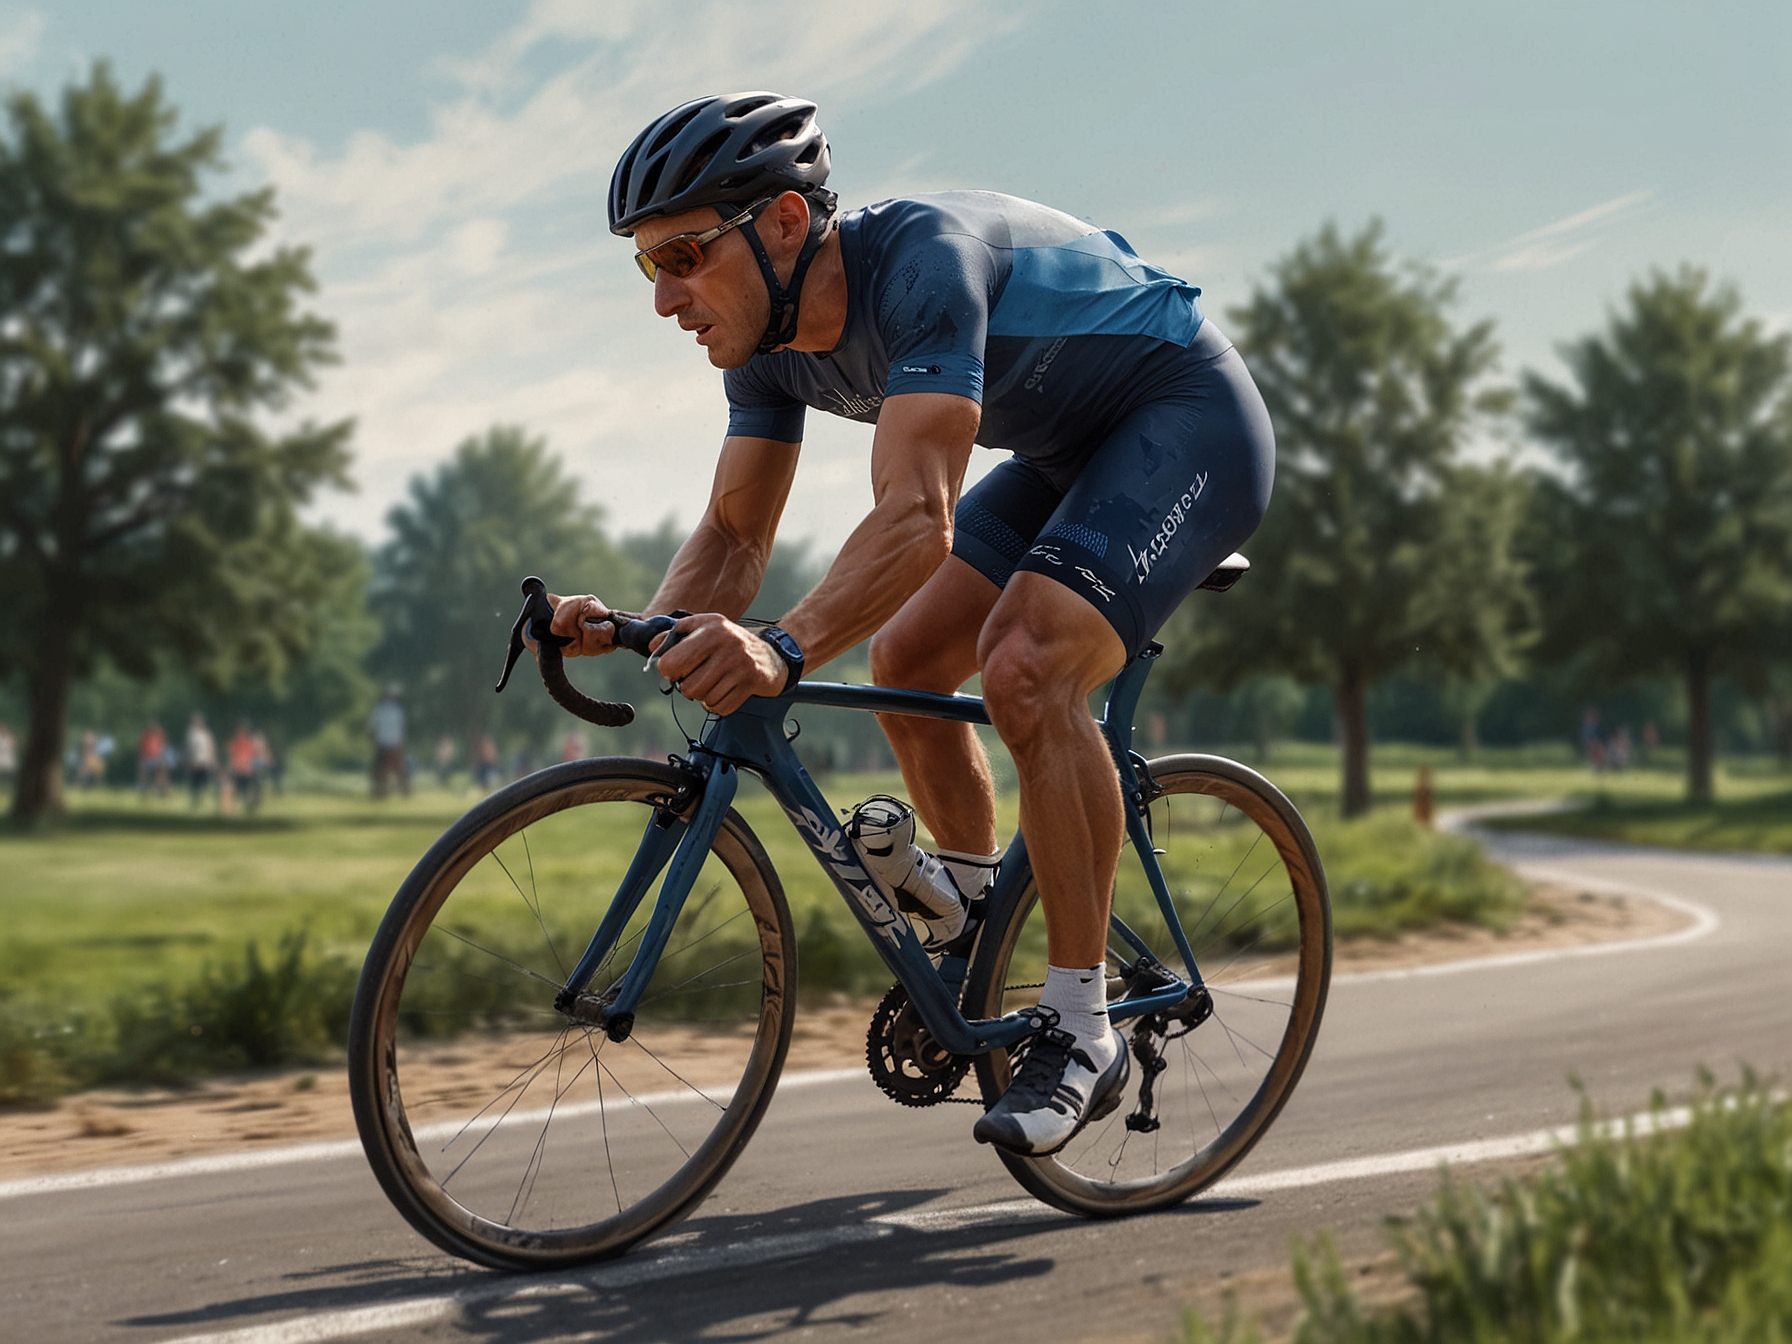 Image of Anthony Gordon cycling on a challenging course during a training session, moments before losing balance and falling, illustrating the intensity and risks involved in athlete training.